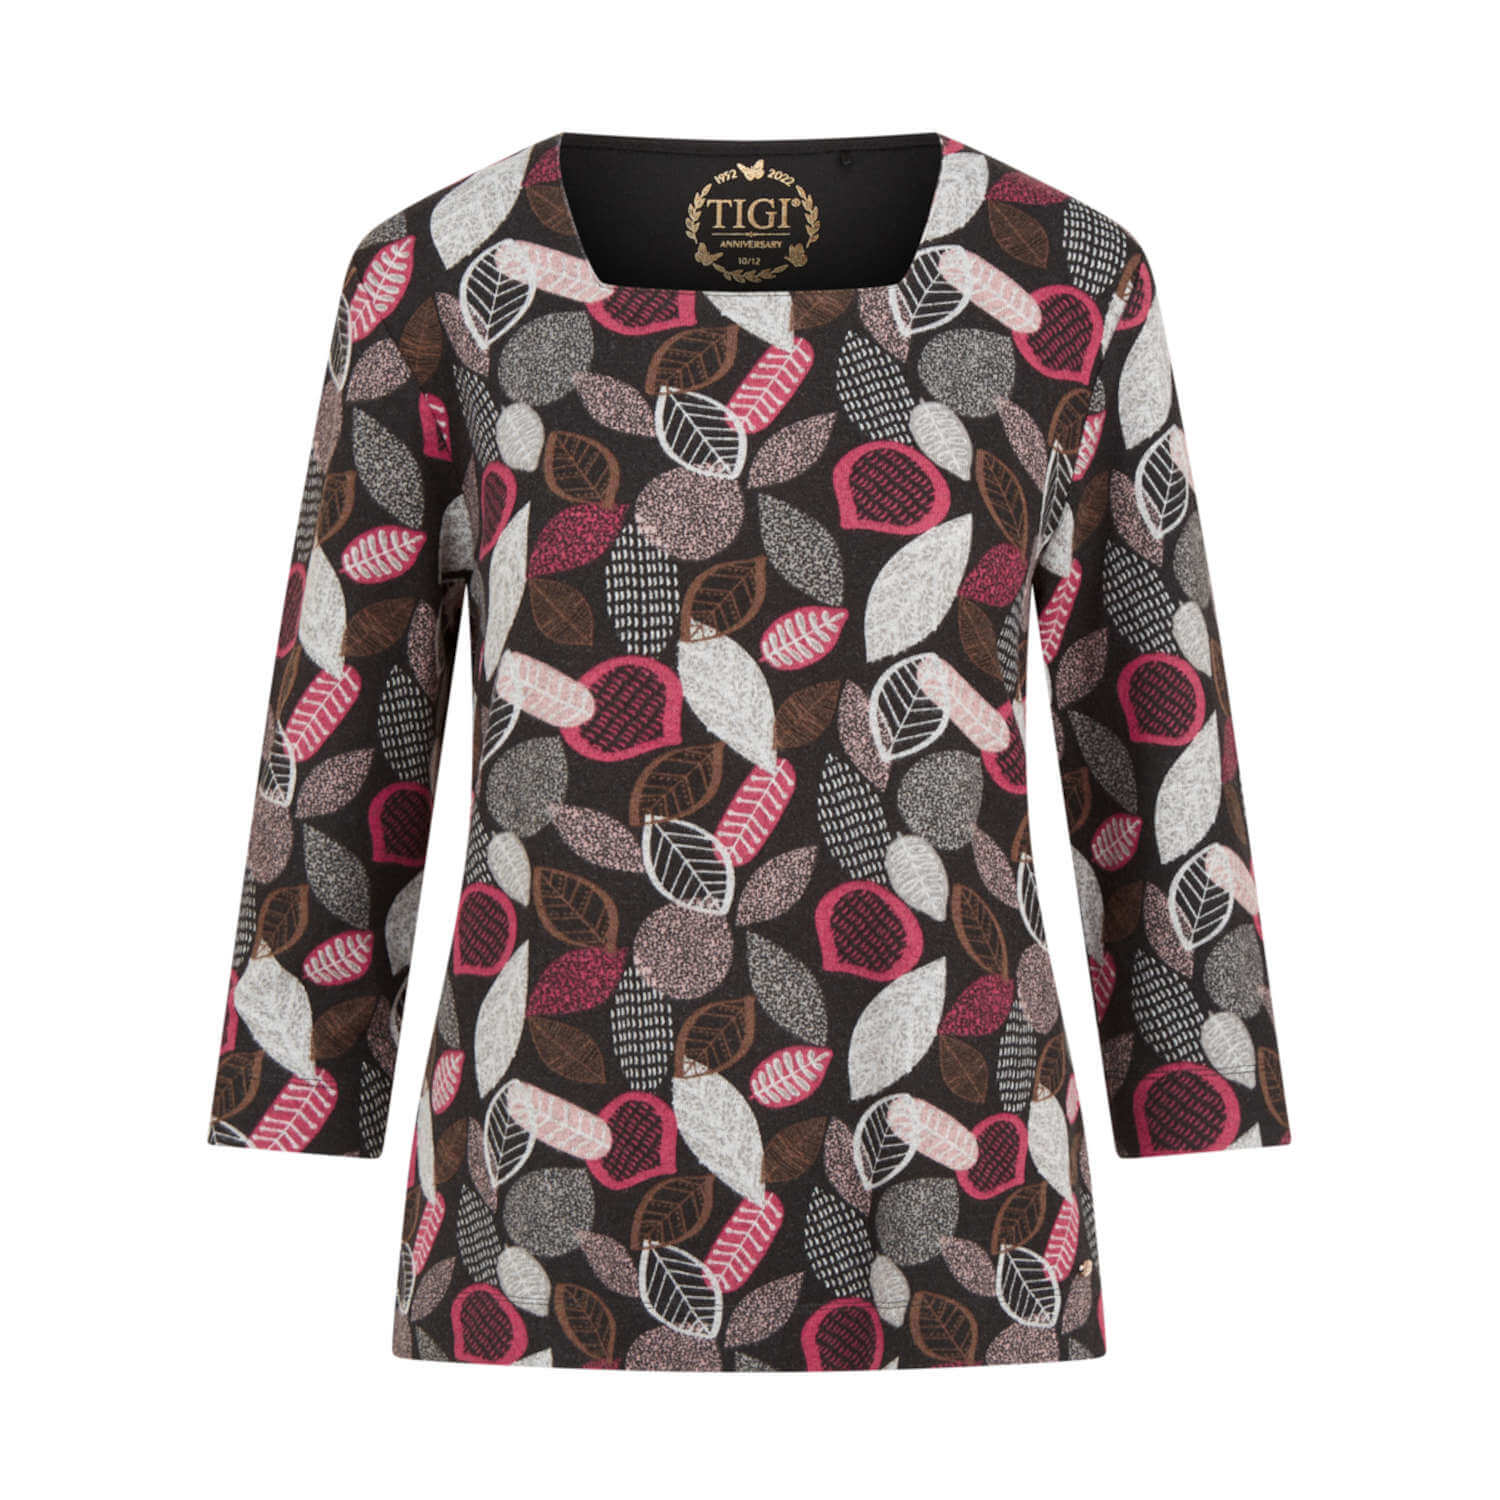 Tigiwear All Over Leaf Print Top - Charcoal 6 Shaws Department Stores